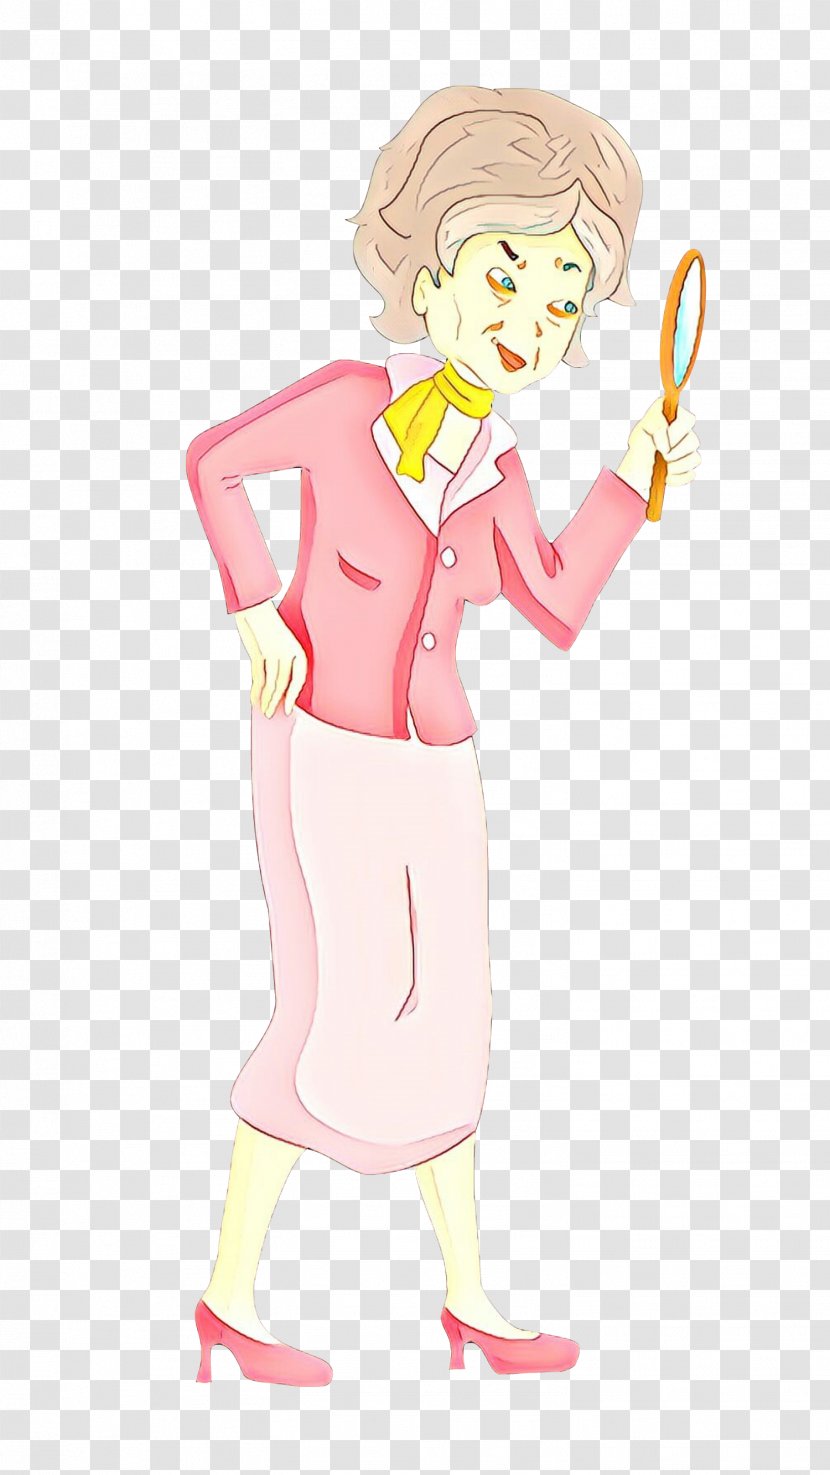 Cartoon Fashion Illustration Costume Design Fictional Character - Pink Lady Style Transparent PNG